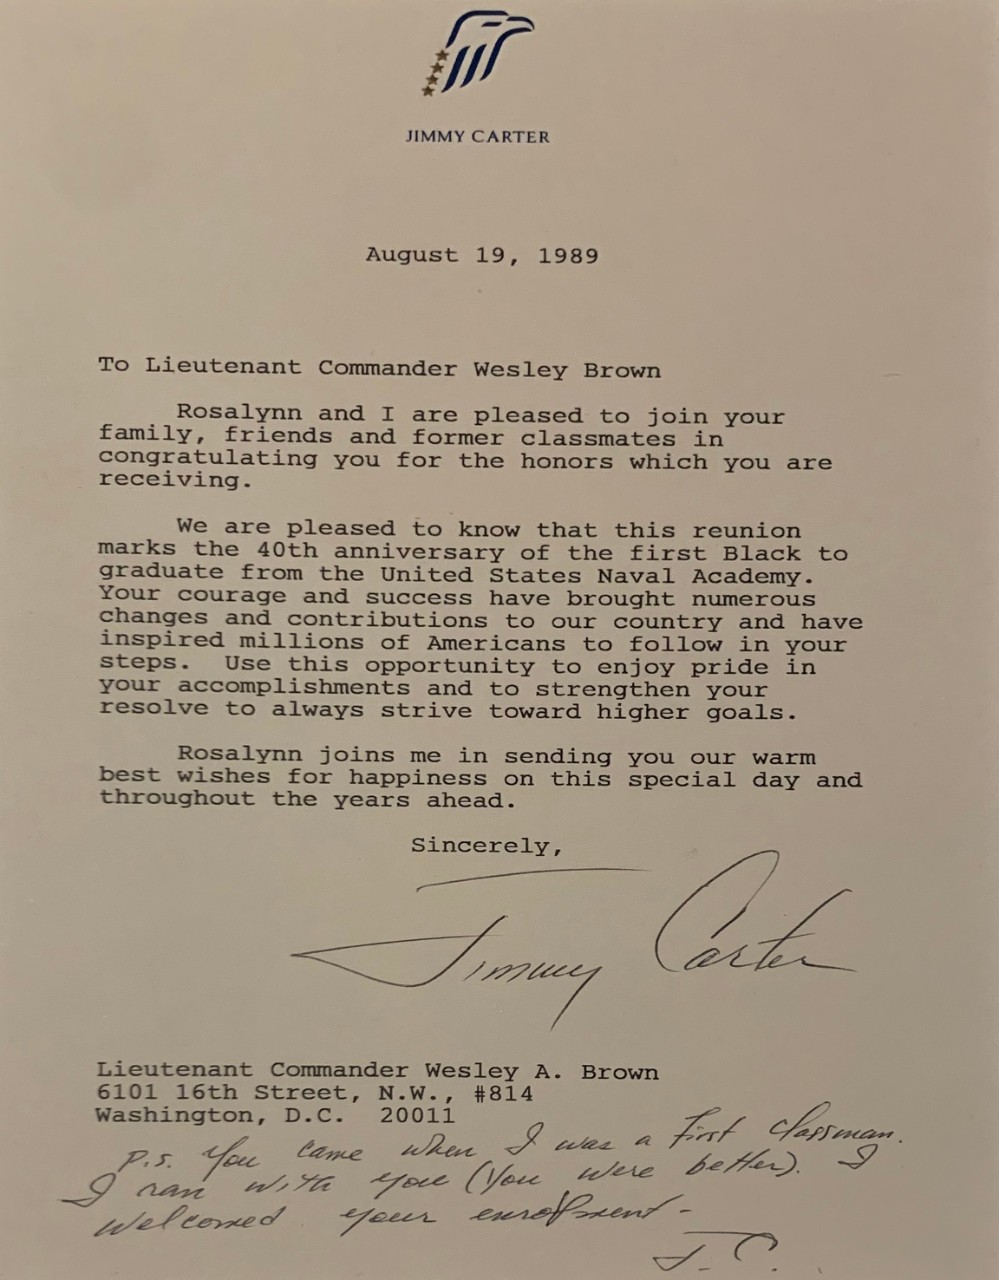 <p>Letter from former president Jimmy Carter to LCDR Wesley Brown, 19 August 1989</p>